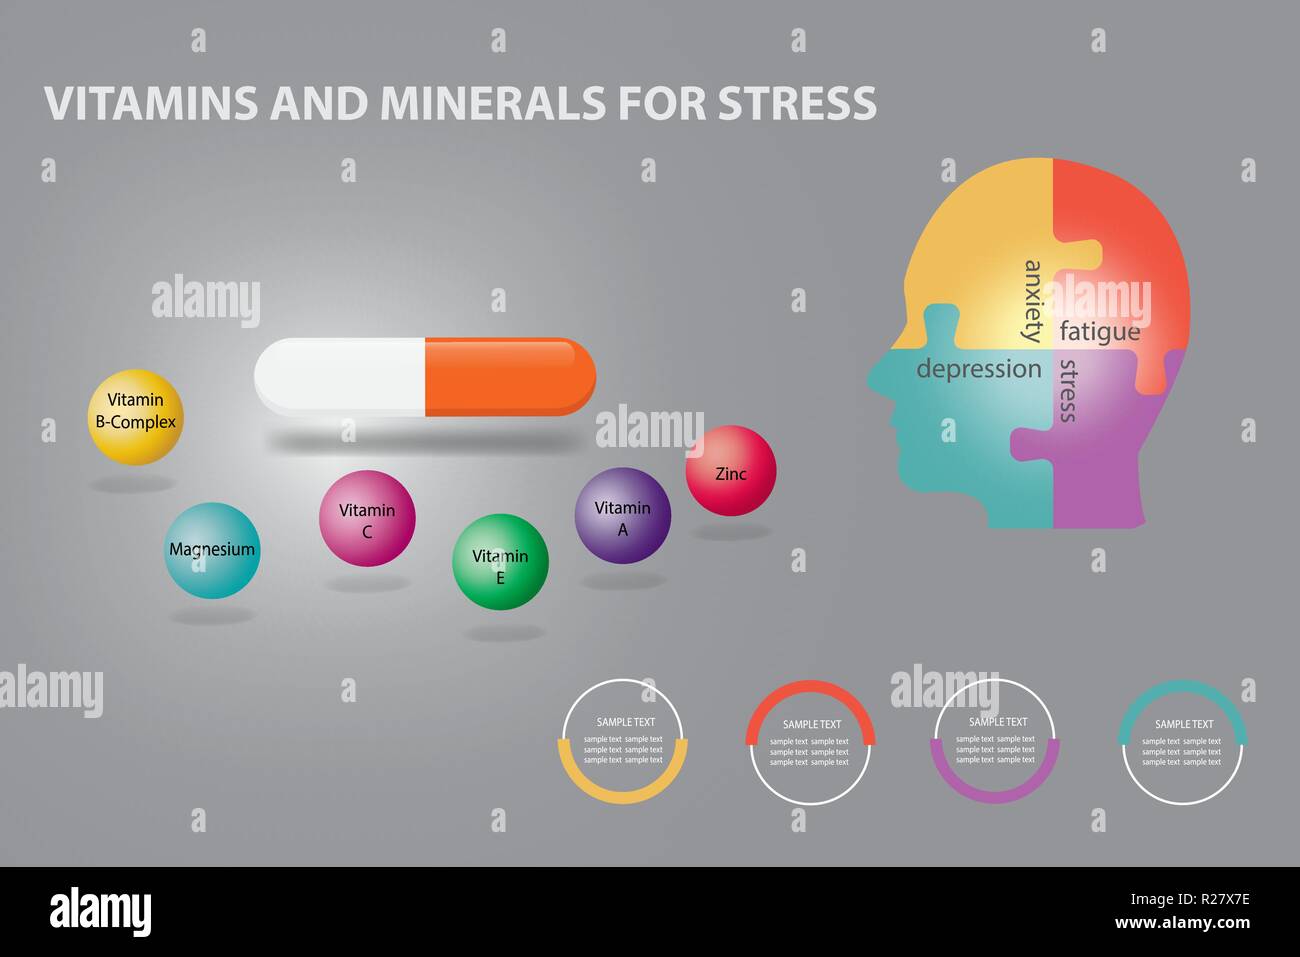 Infographic Vector Showing Capsule Of The Vitamins And Minerals For